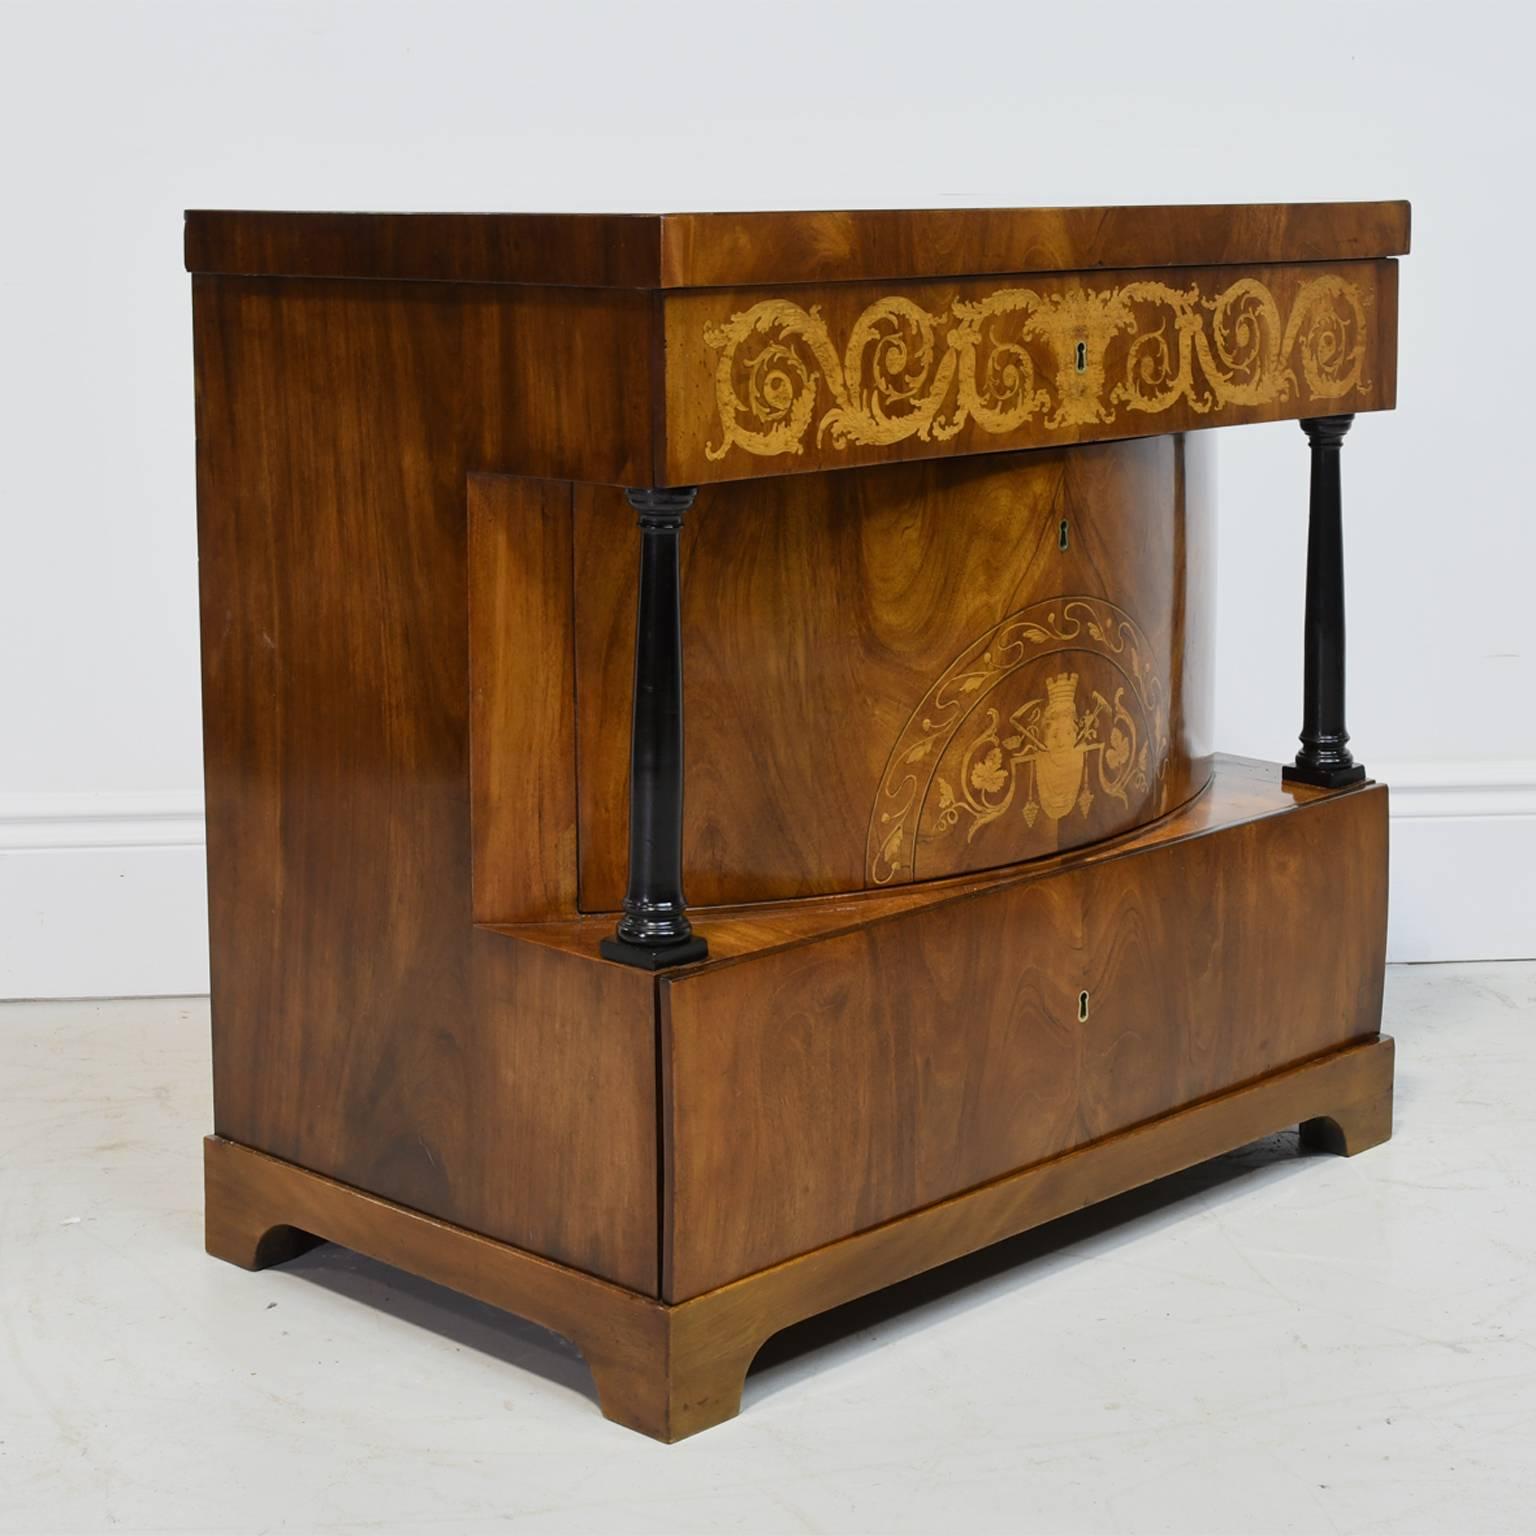 19th Century Biedermeier Chest of Drawers in Mahogany with Marquetry Inlays, Germany